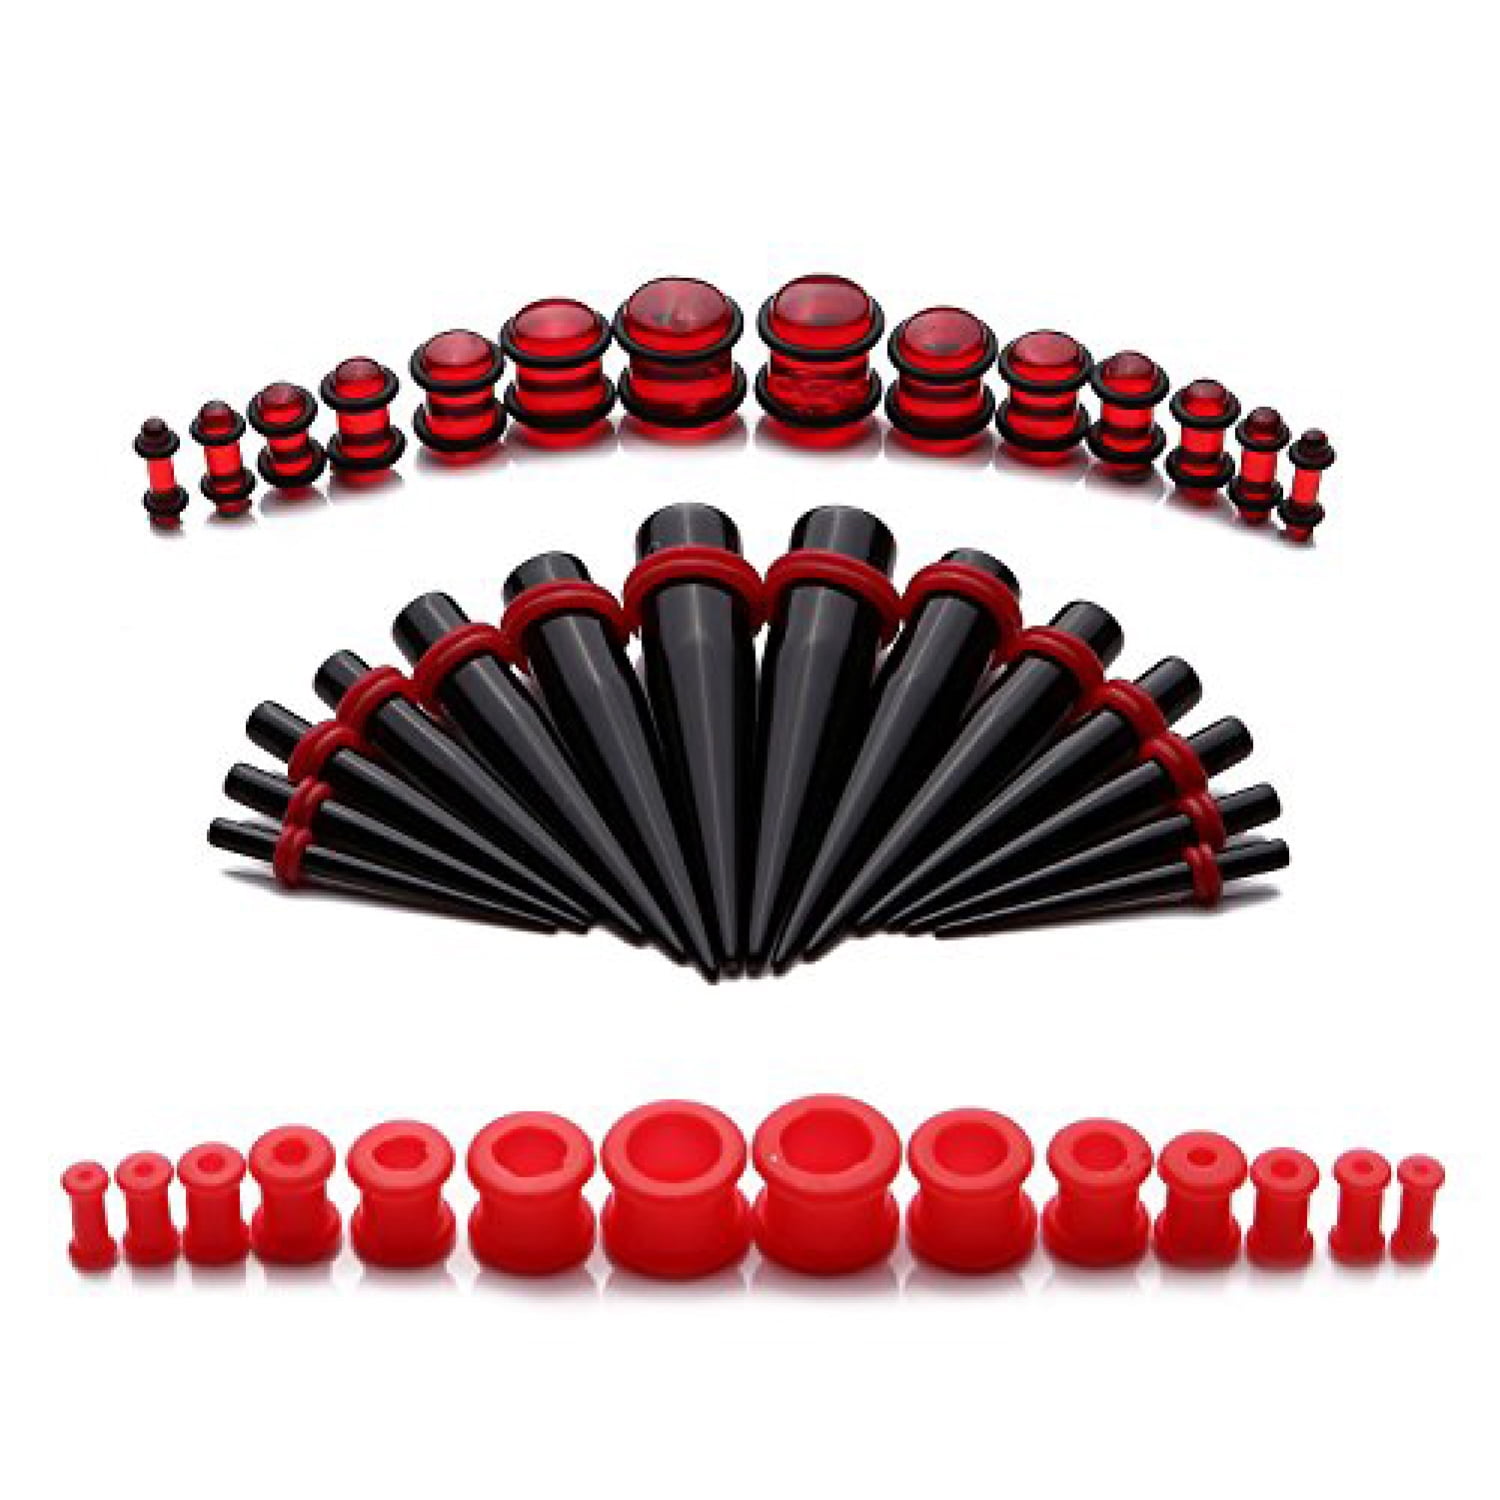 28pc Gauges Acrylic Black Taper Silicone Ear Tunnel Plug Stretching Kit Set 